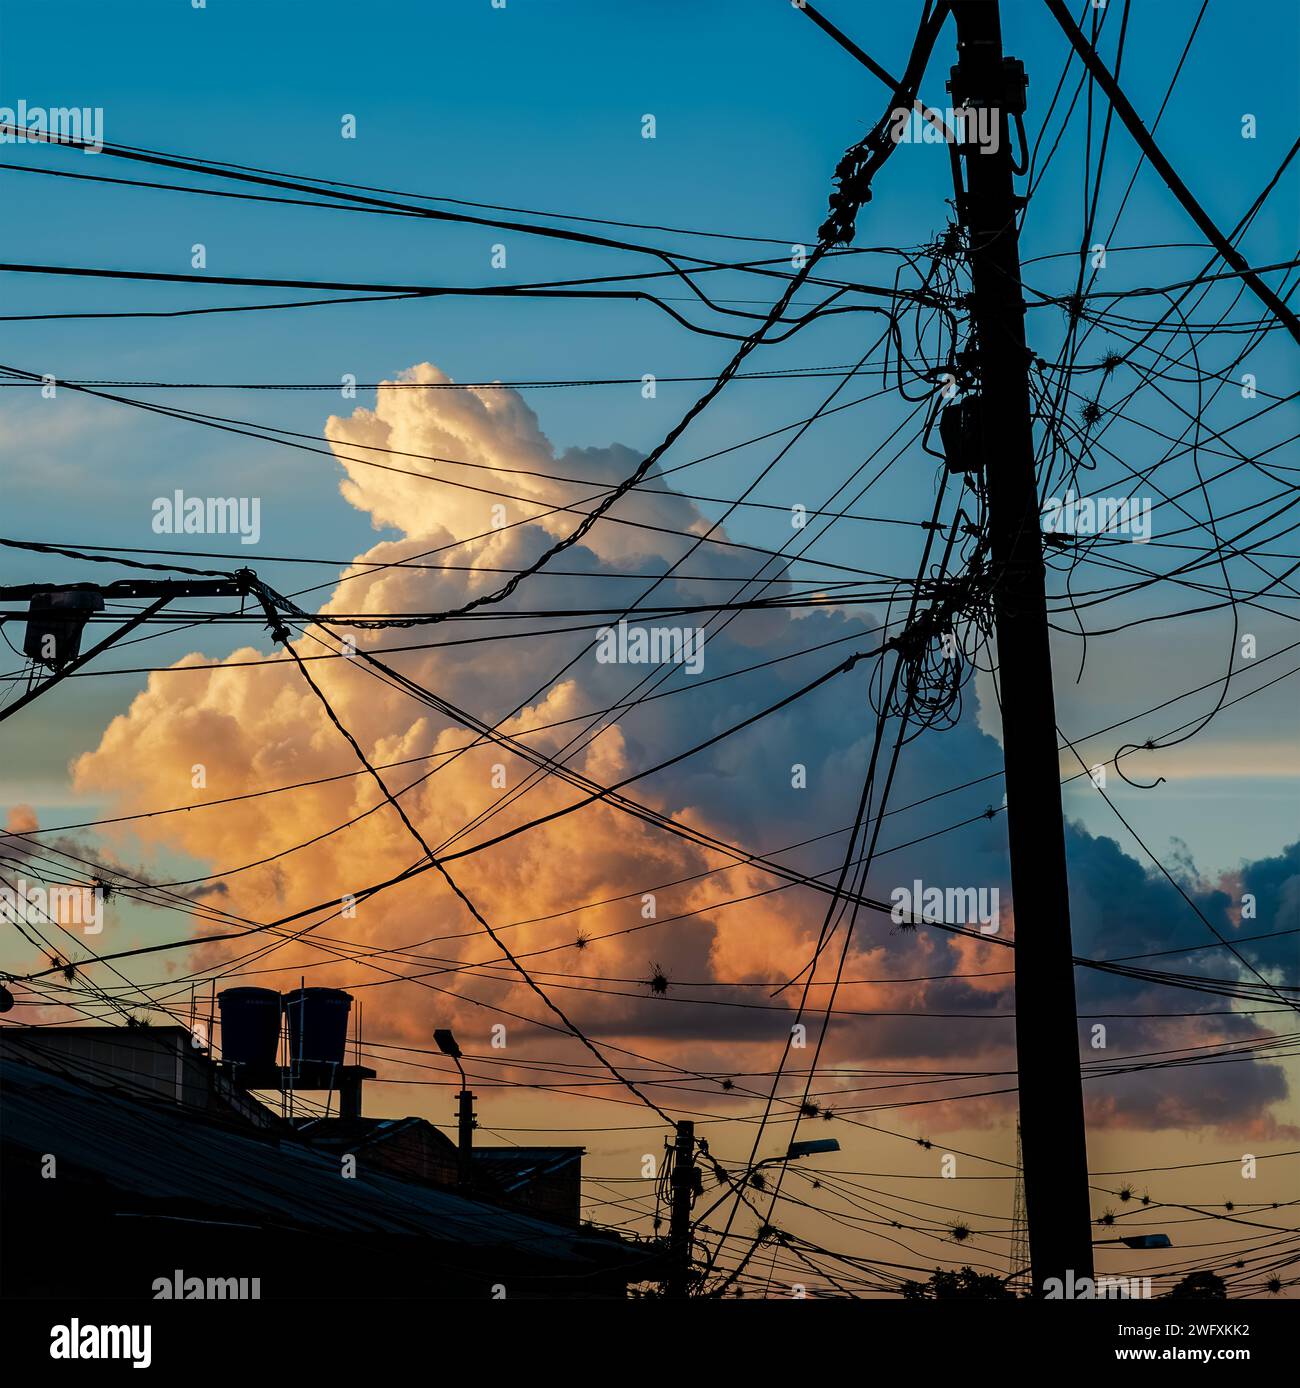 A beautiful large cloud imprisoned by the meshes of a tangle of electrical cables at sunset. Armenia, Quindío, Colombia. Stock Photo